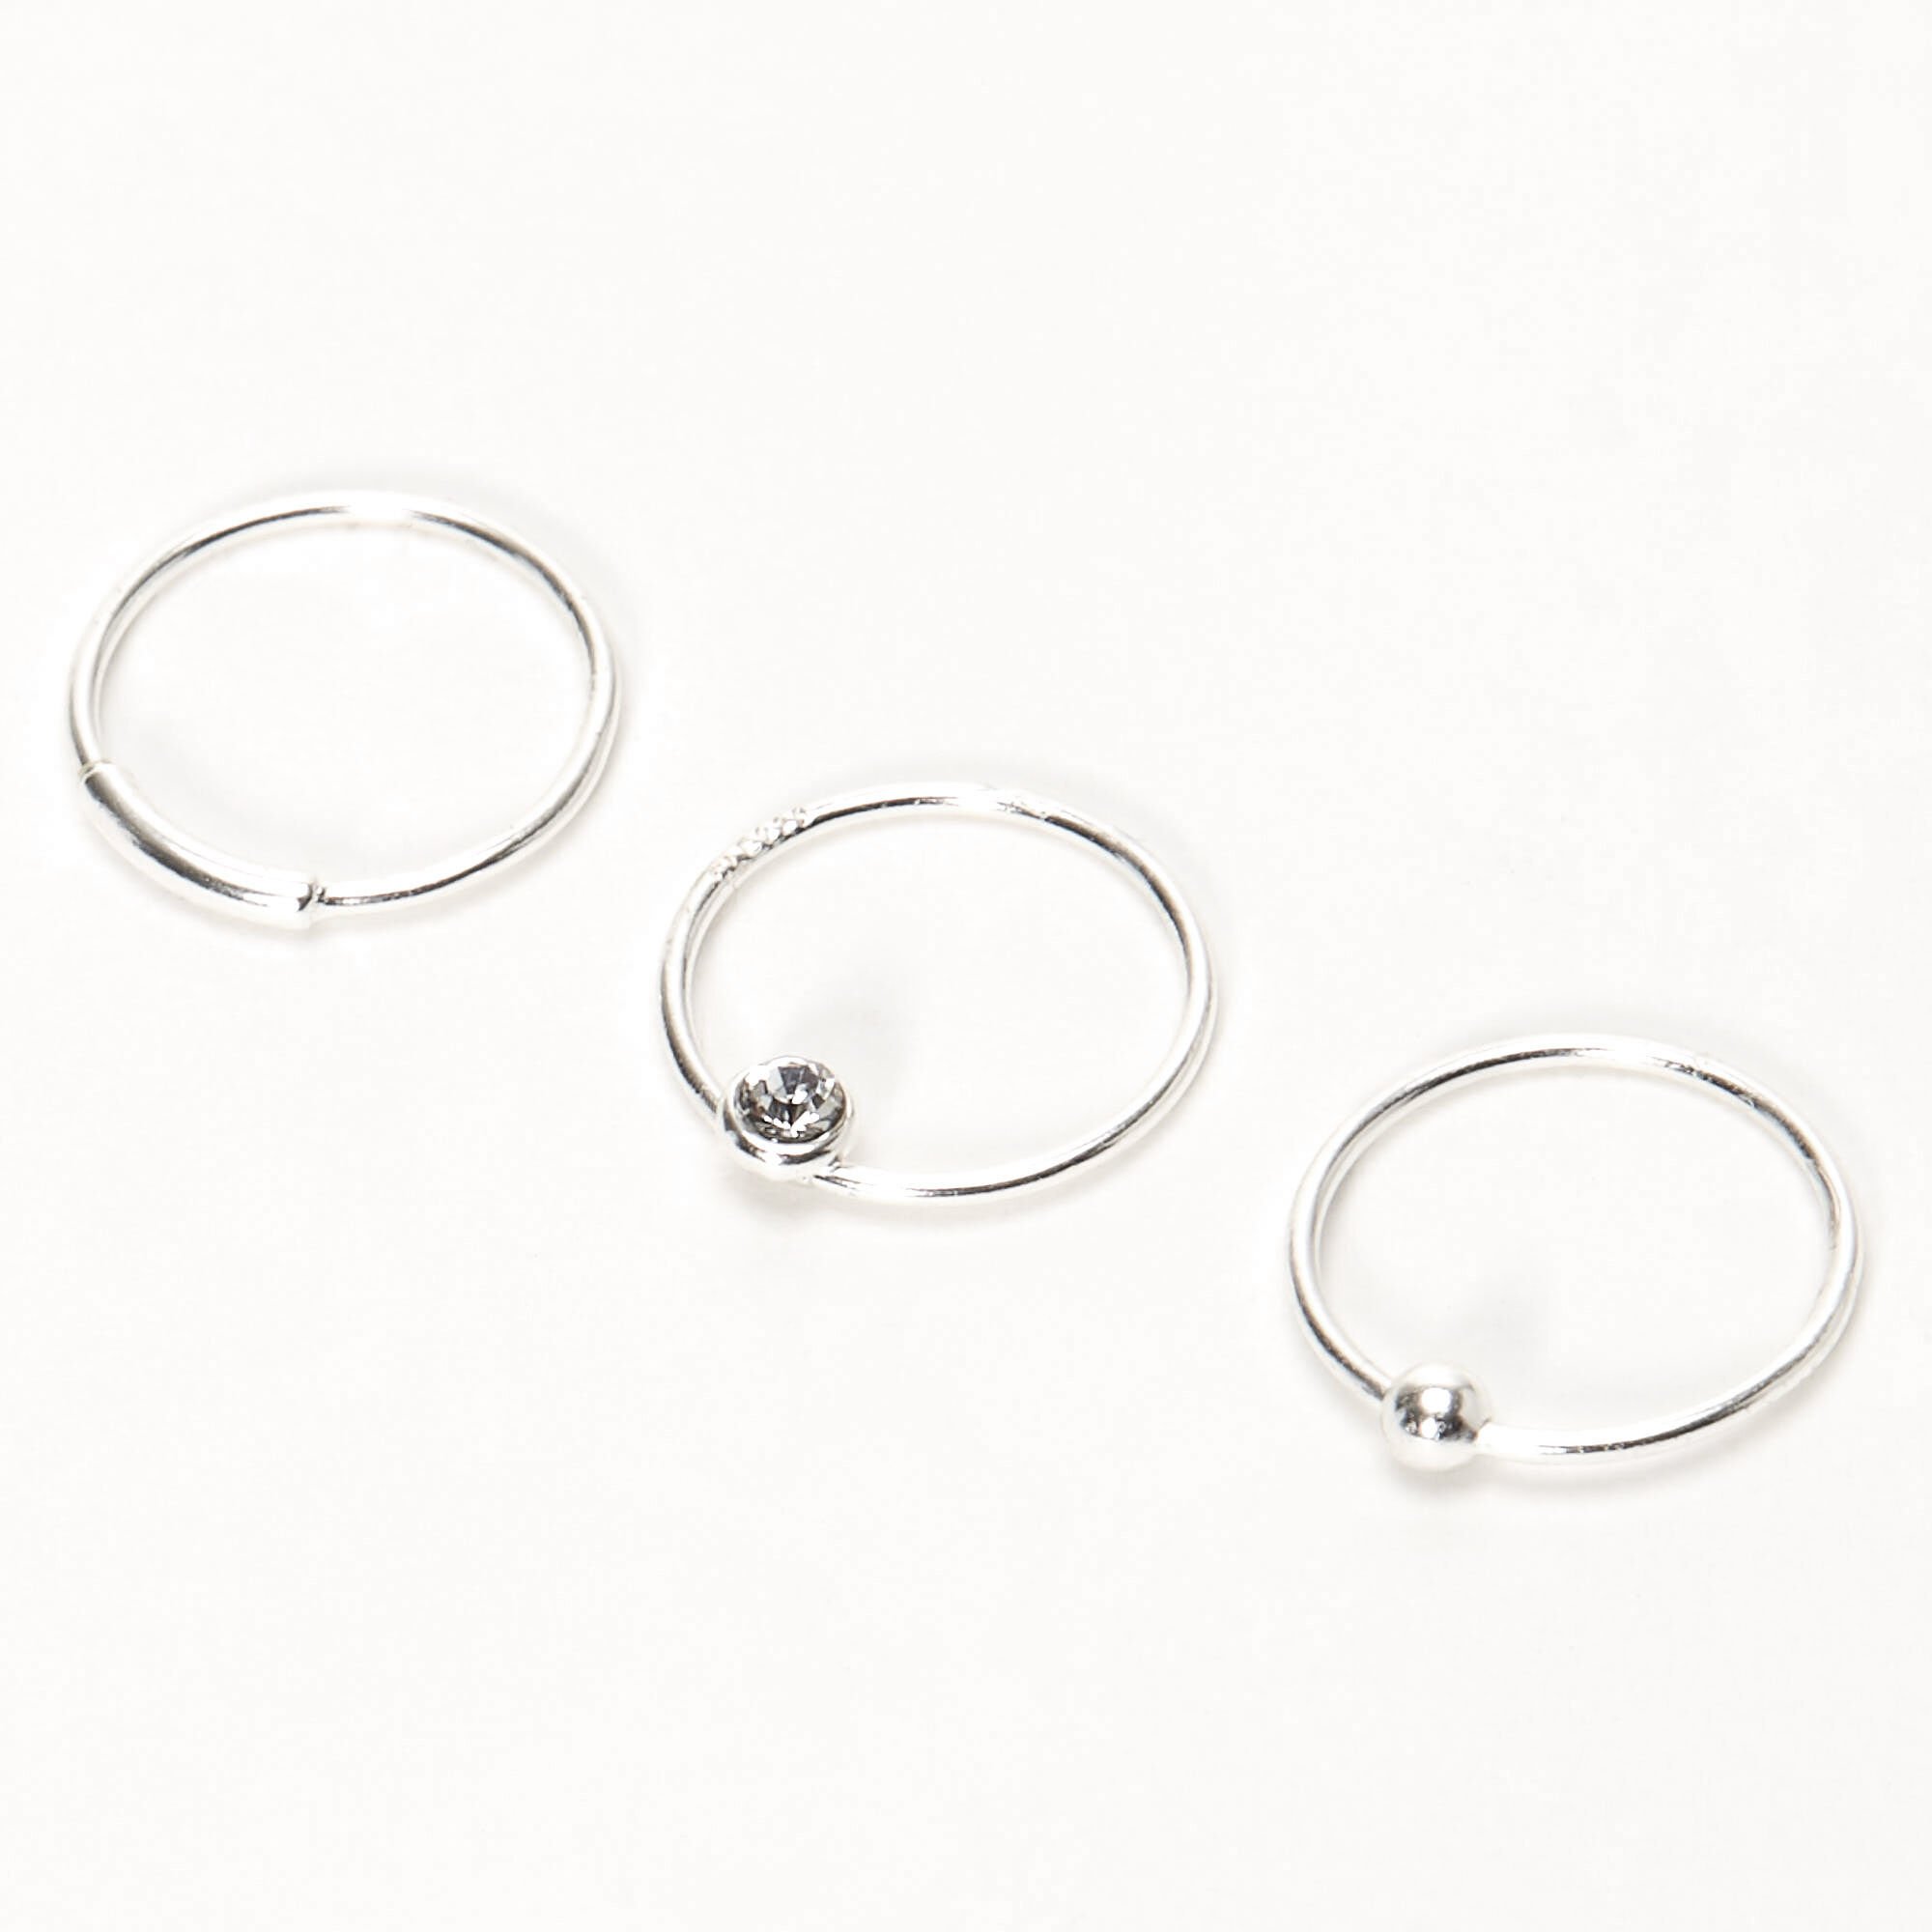 View Claires 22G Bar Ball Crystal Hoop Nose Rings 3 Pack Silver information